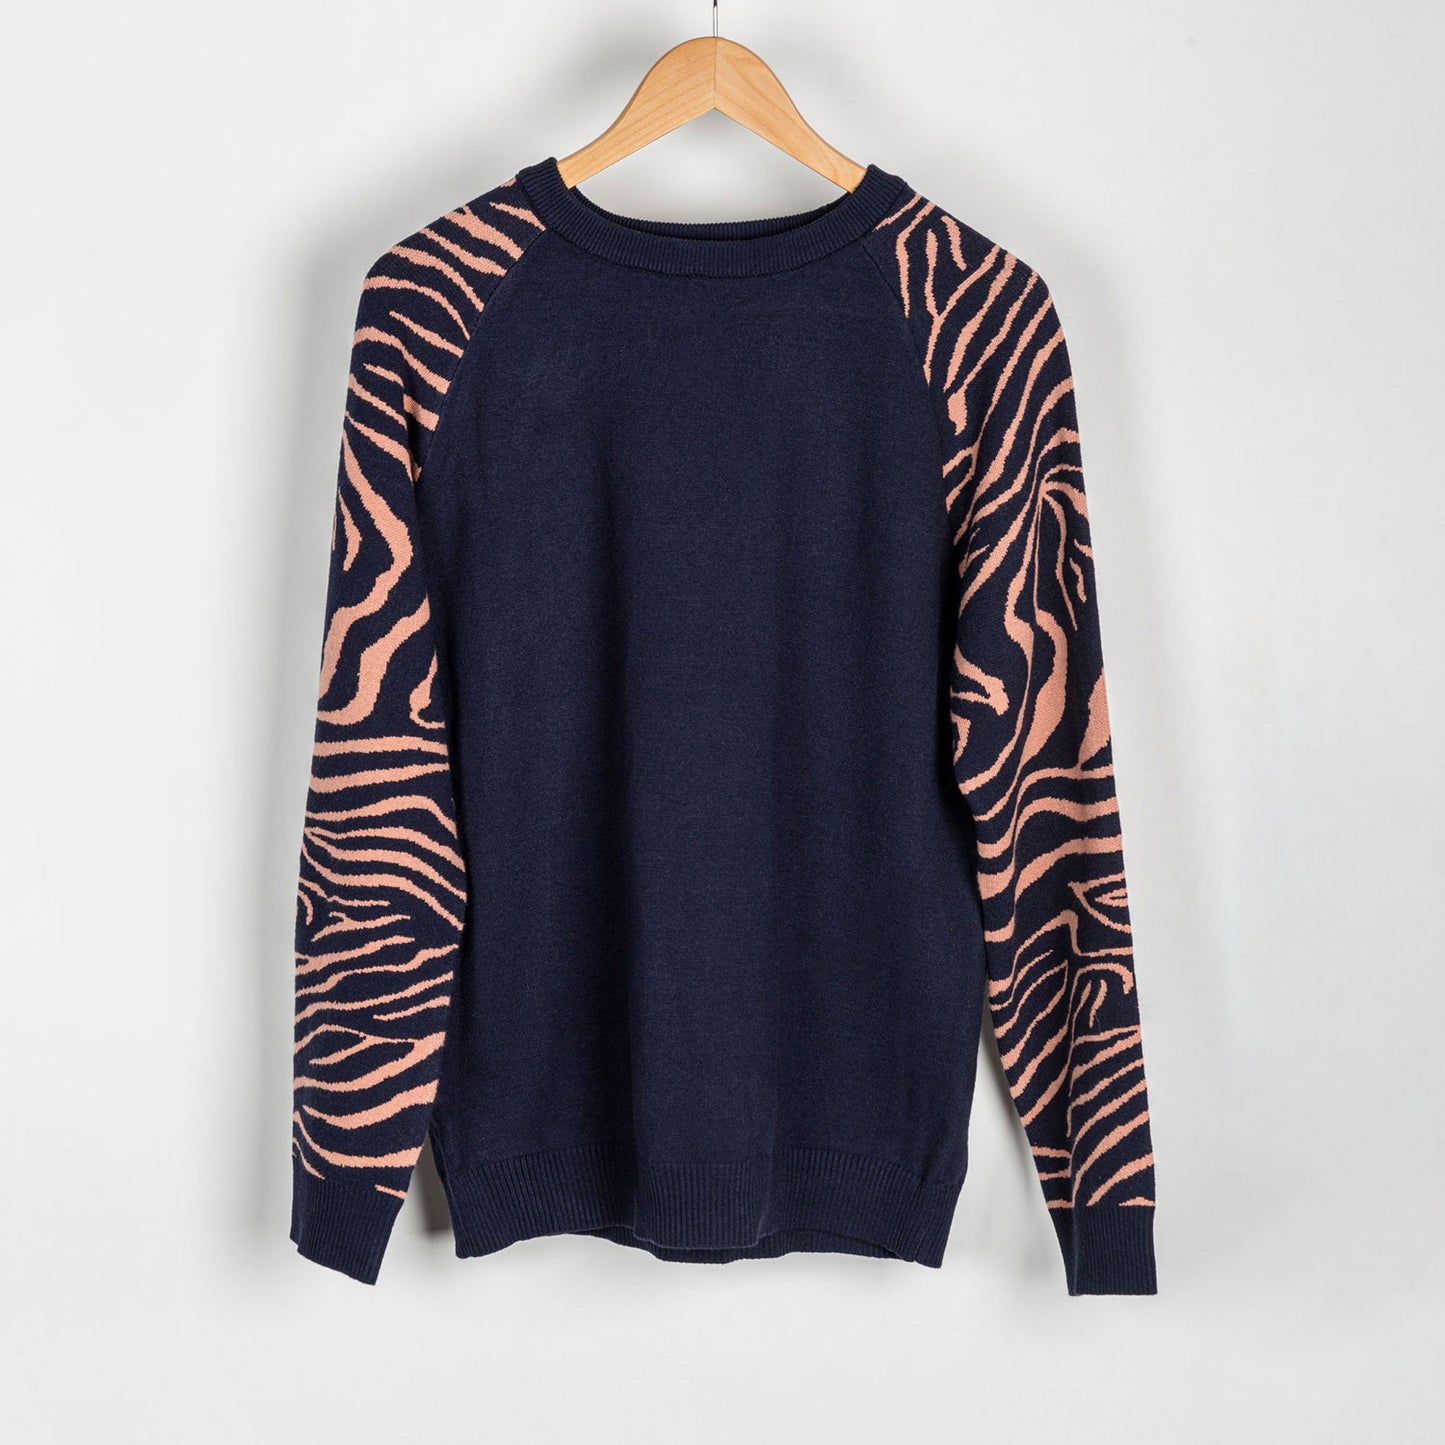 Navy Tiger Contrast Sleeve Sweater